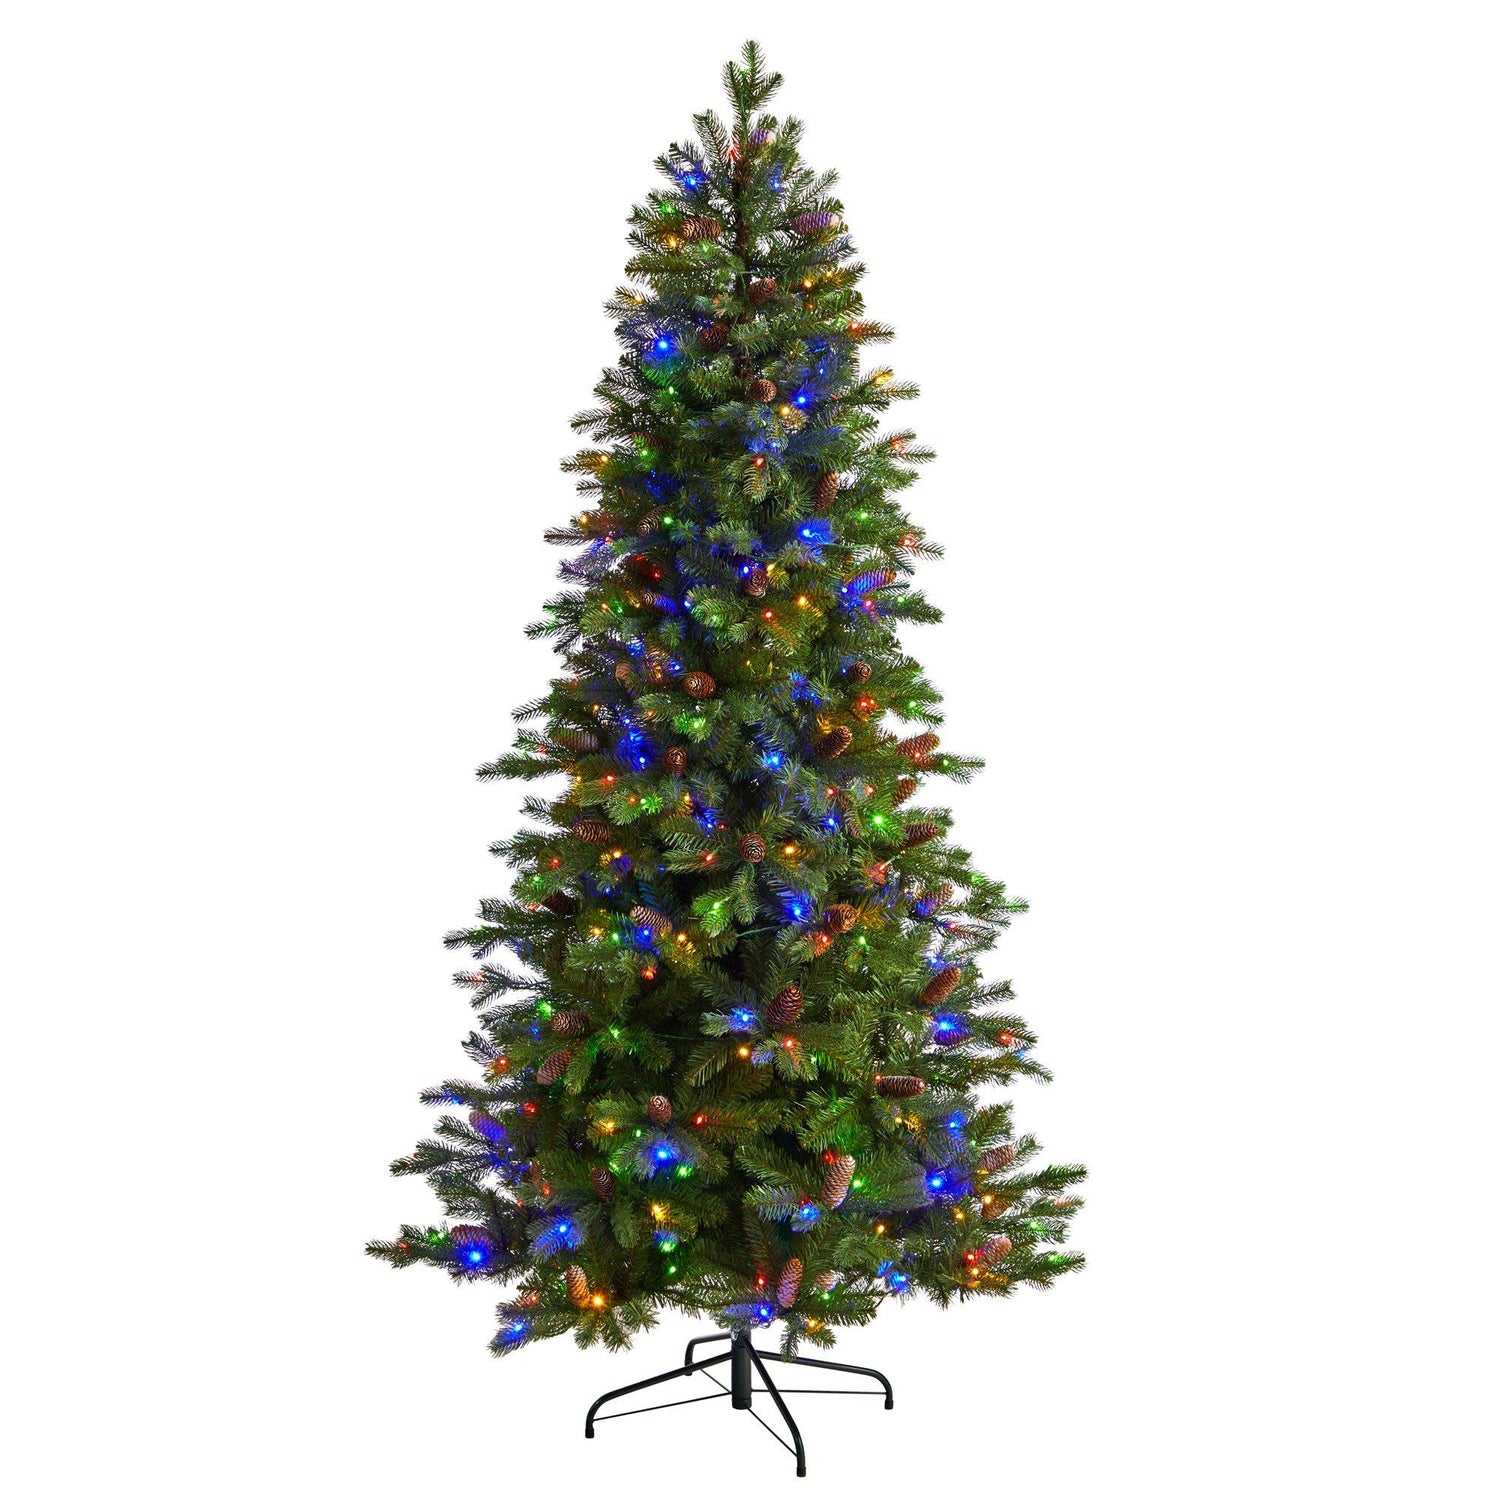 7’ Fraser Fir Artificial Christmas Tree with 300 Multicolor LED Lights and 1179 Bendable Branches